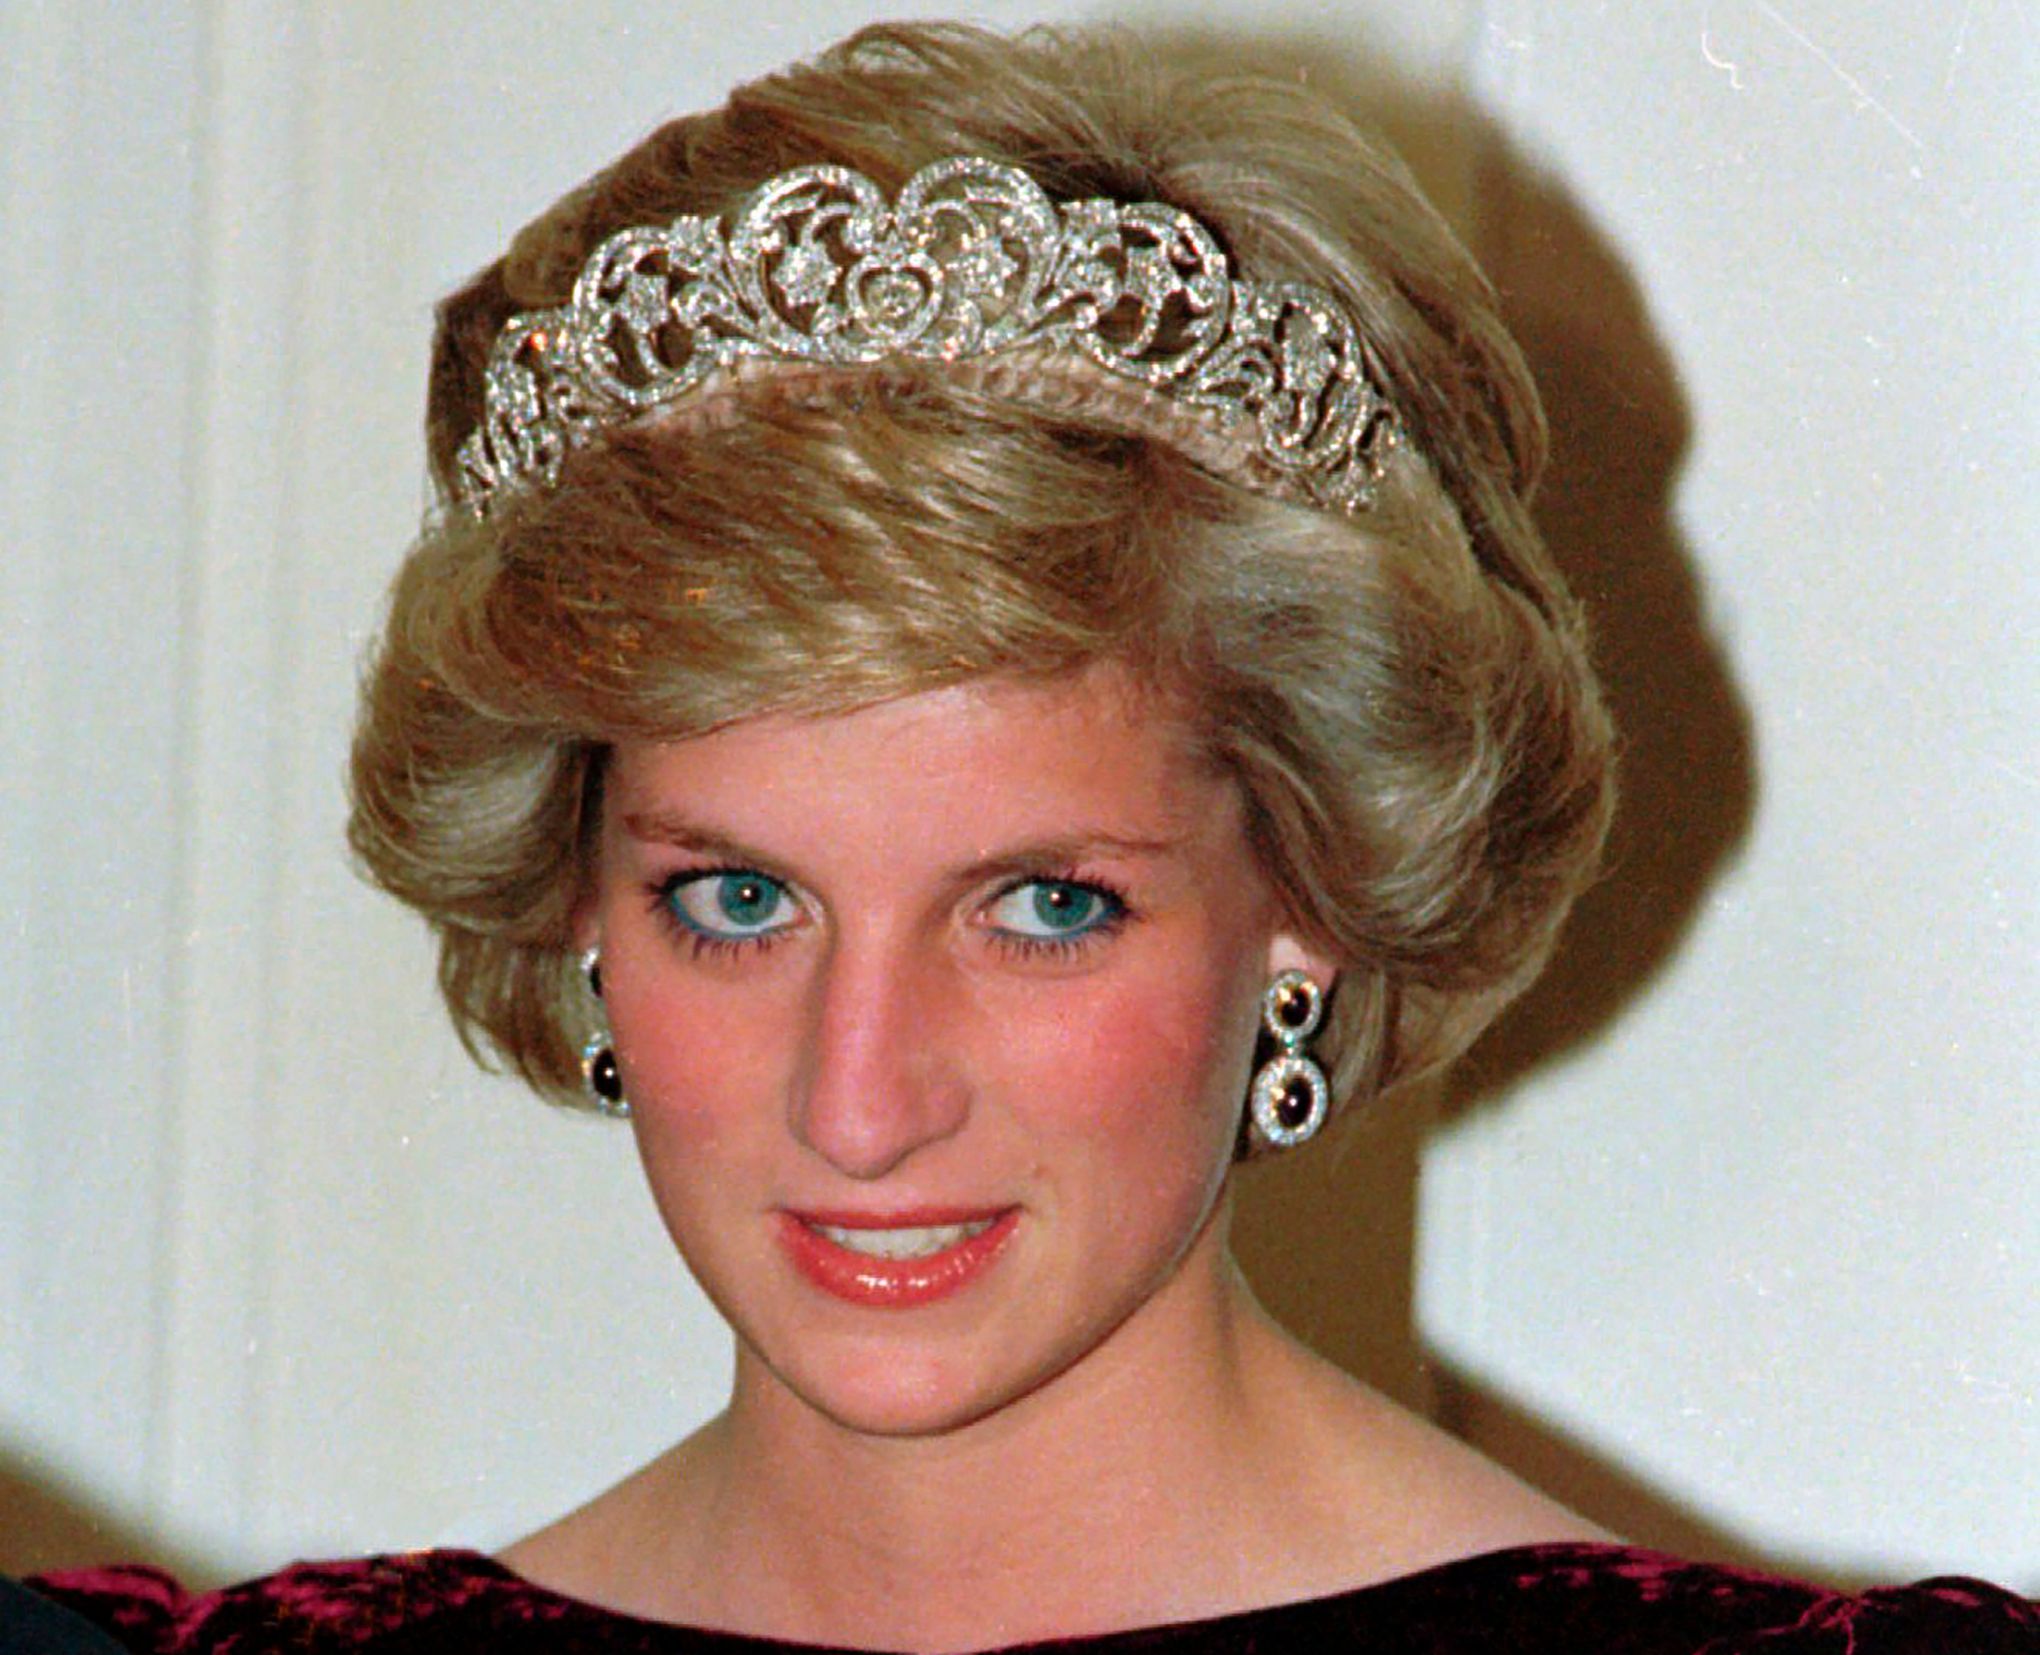 princess diana Archives - Those Blondes